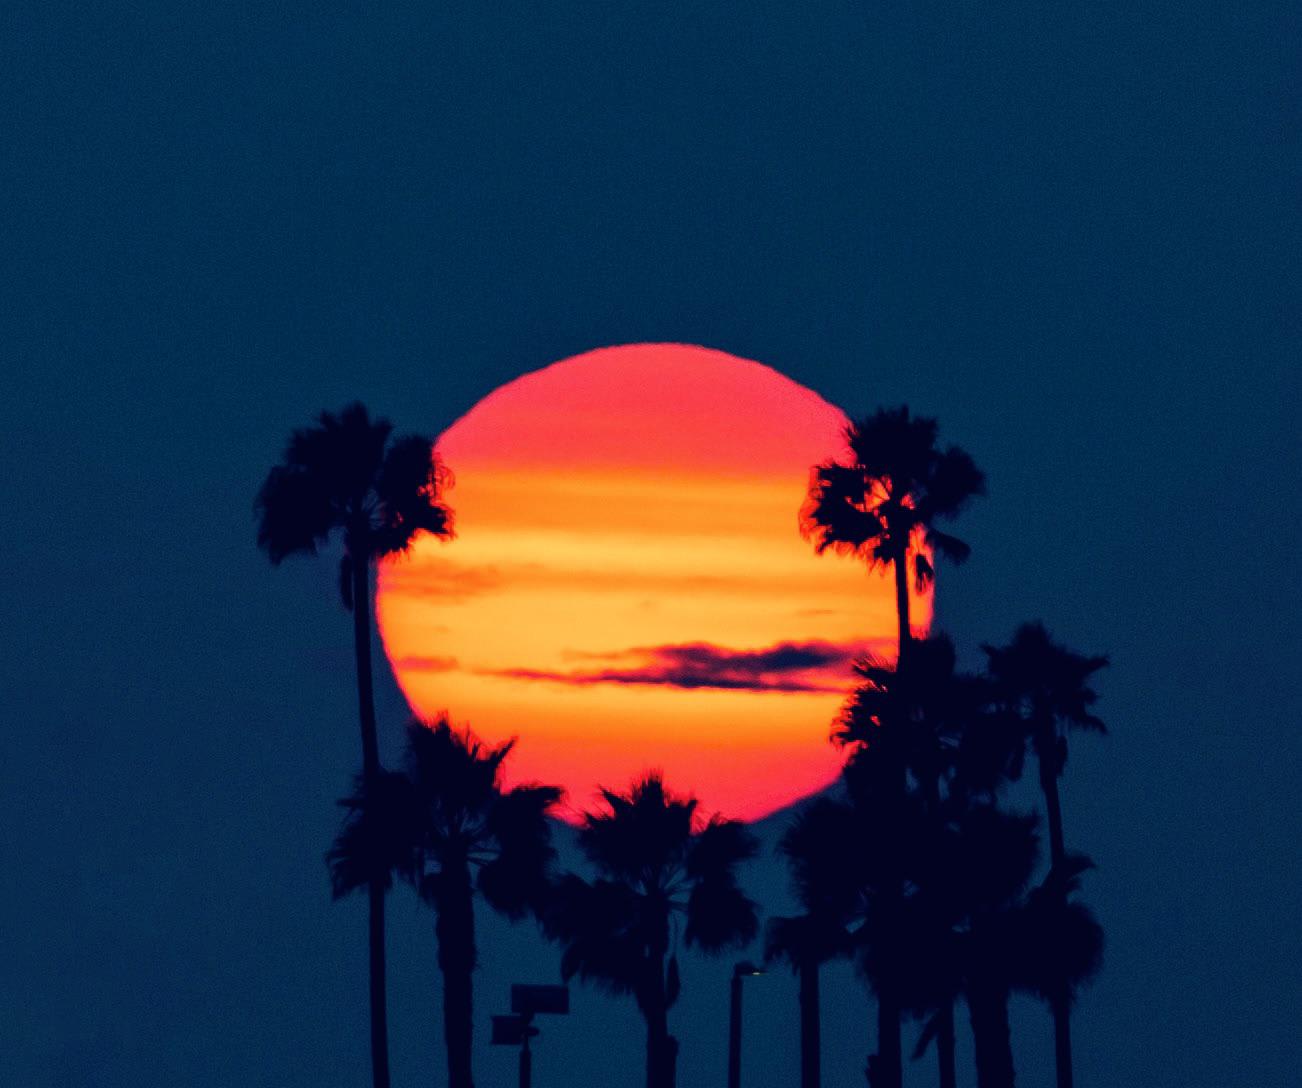 ITAP of the sun lining up with some palm trees